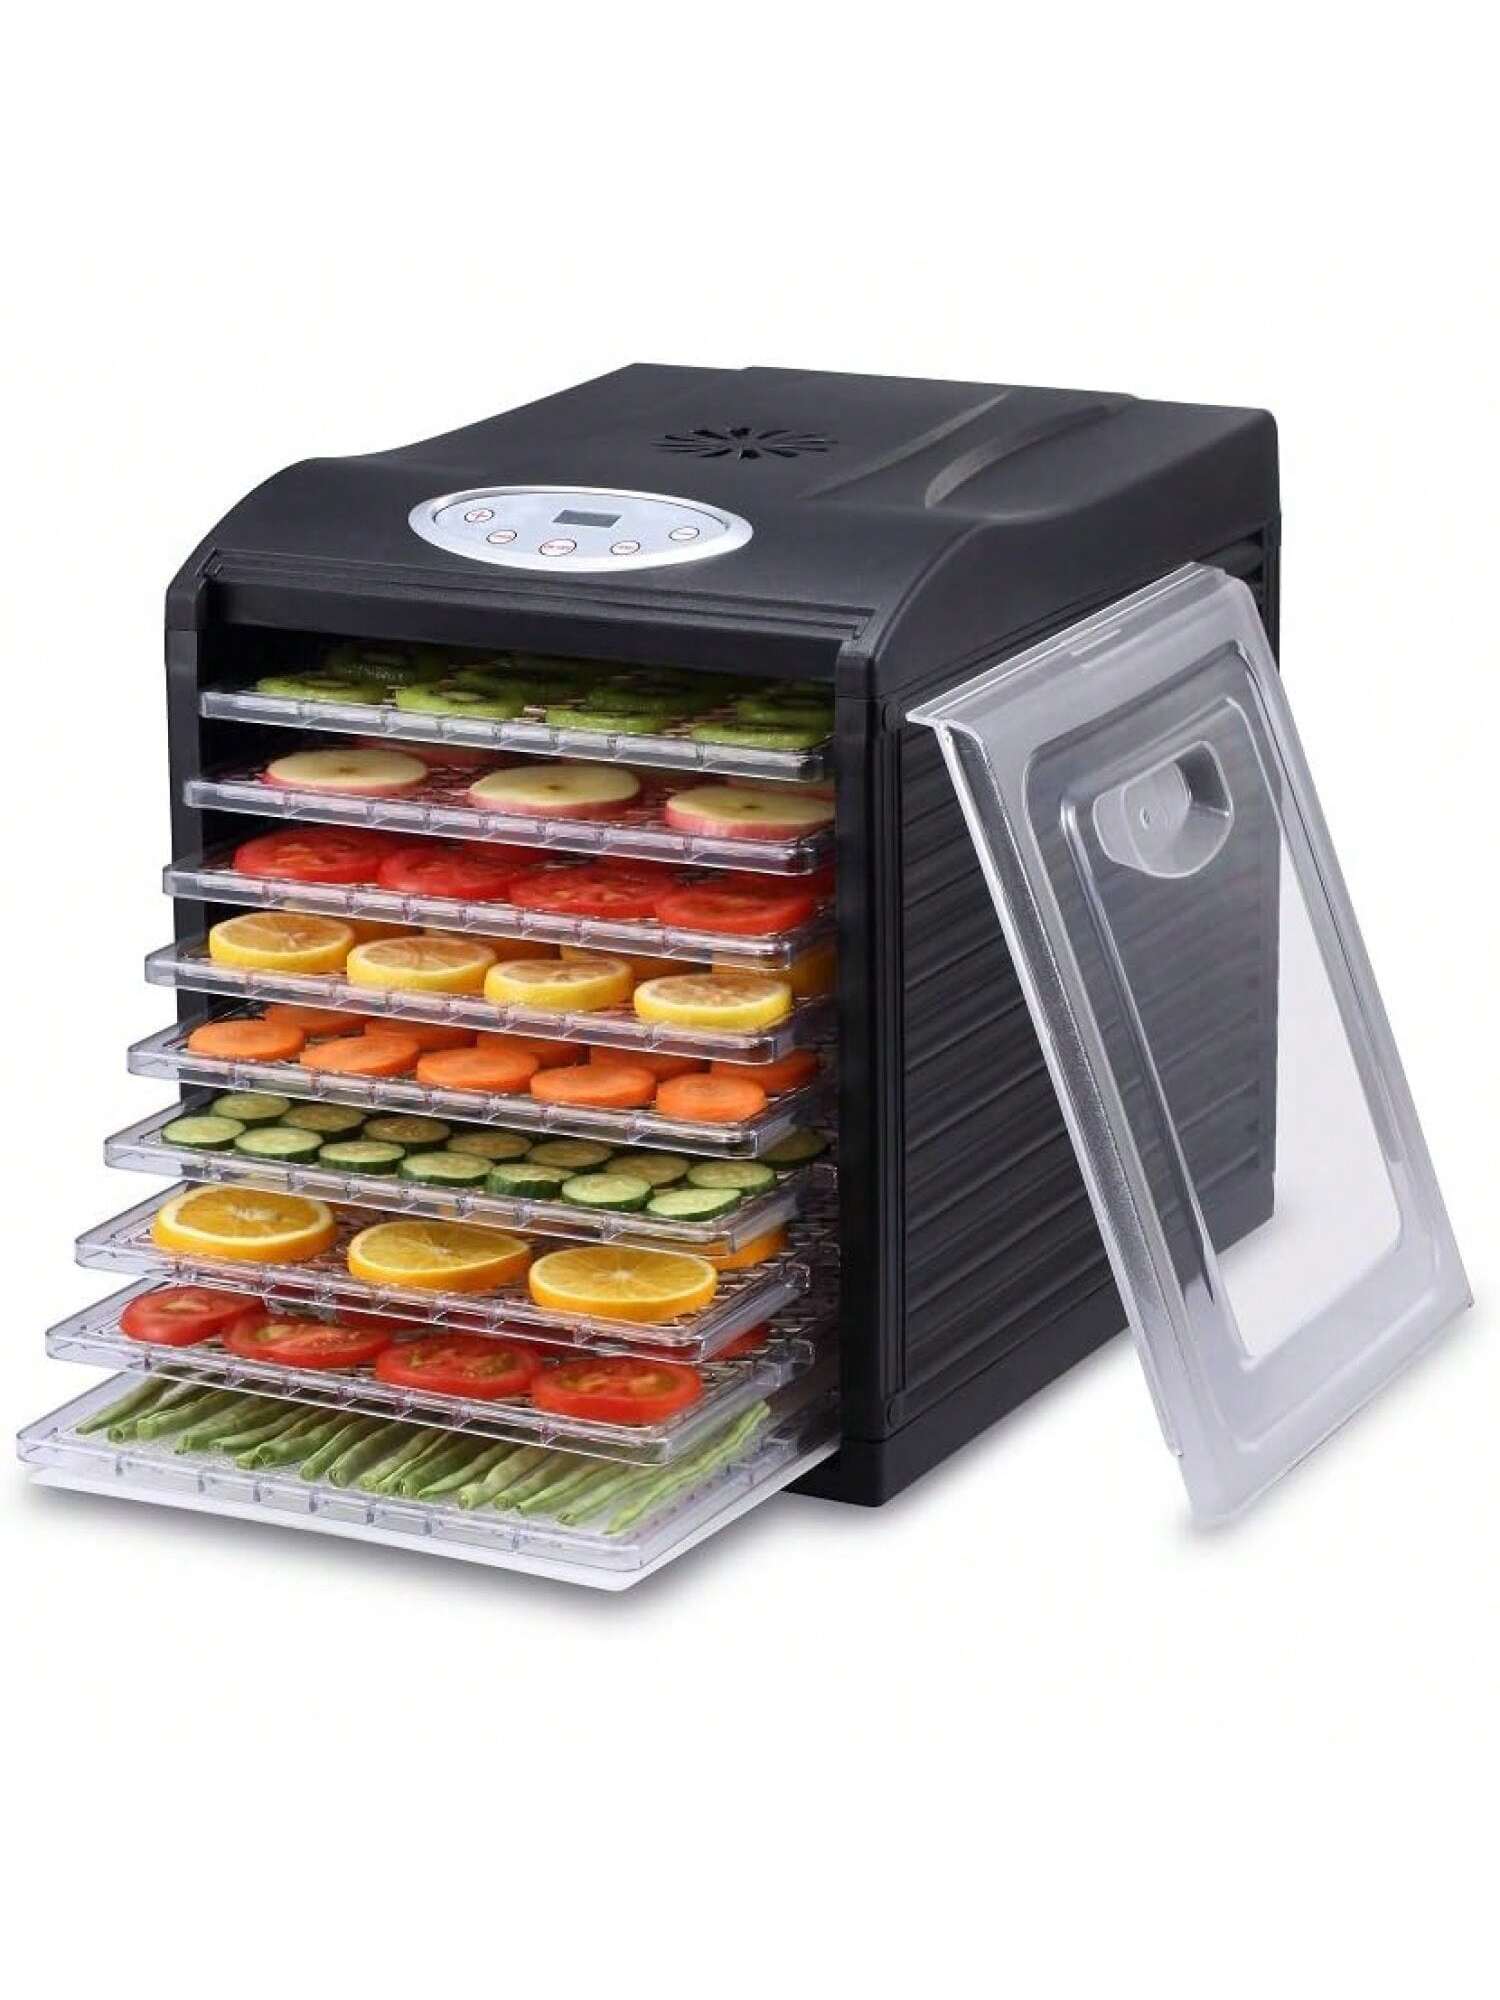 "Silent" 9 Tray Dehydrator with Digital Timer and Temperature Control for Fruit, Vegetables, Jerky, s, Dog Treats, Fruit Leathers and More-Multicolor-1